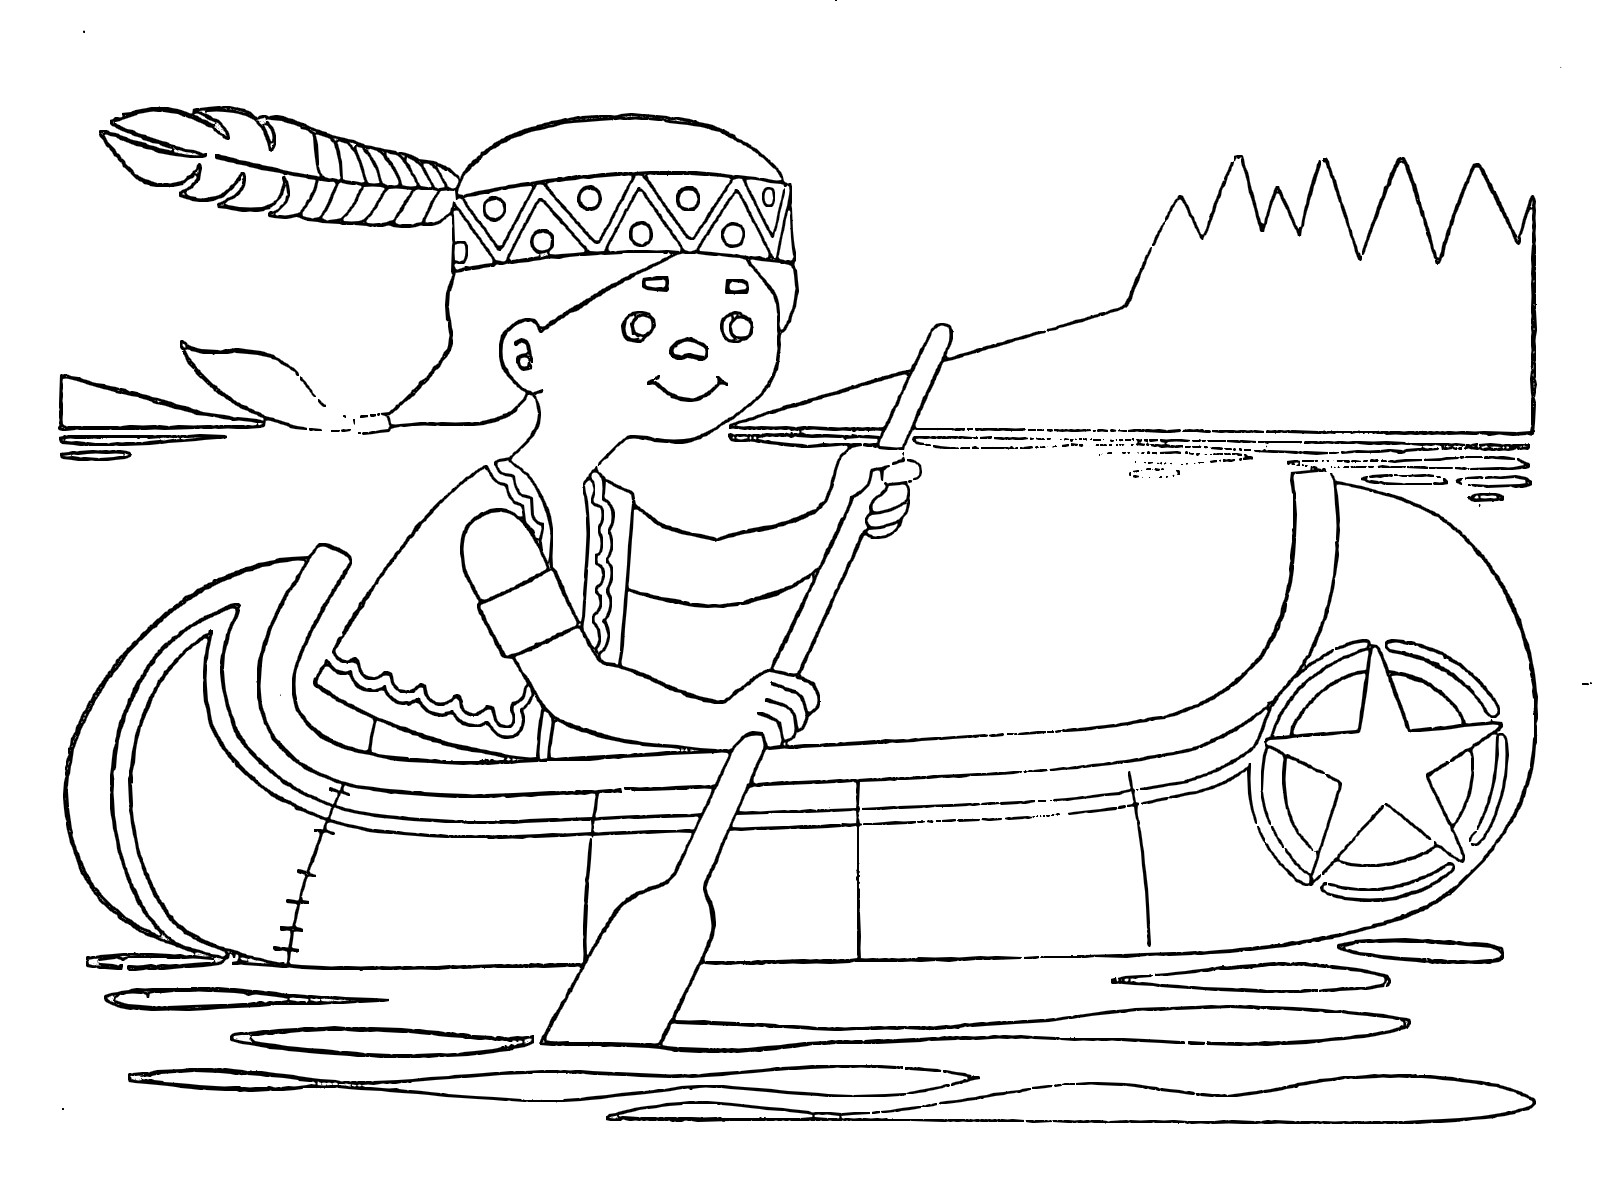 Indian On A Boat coloring page